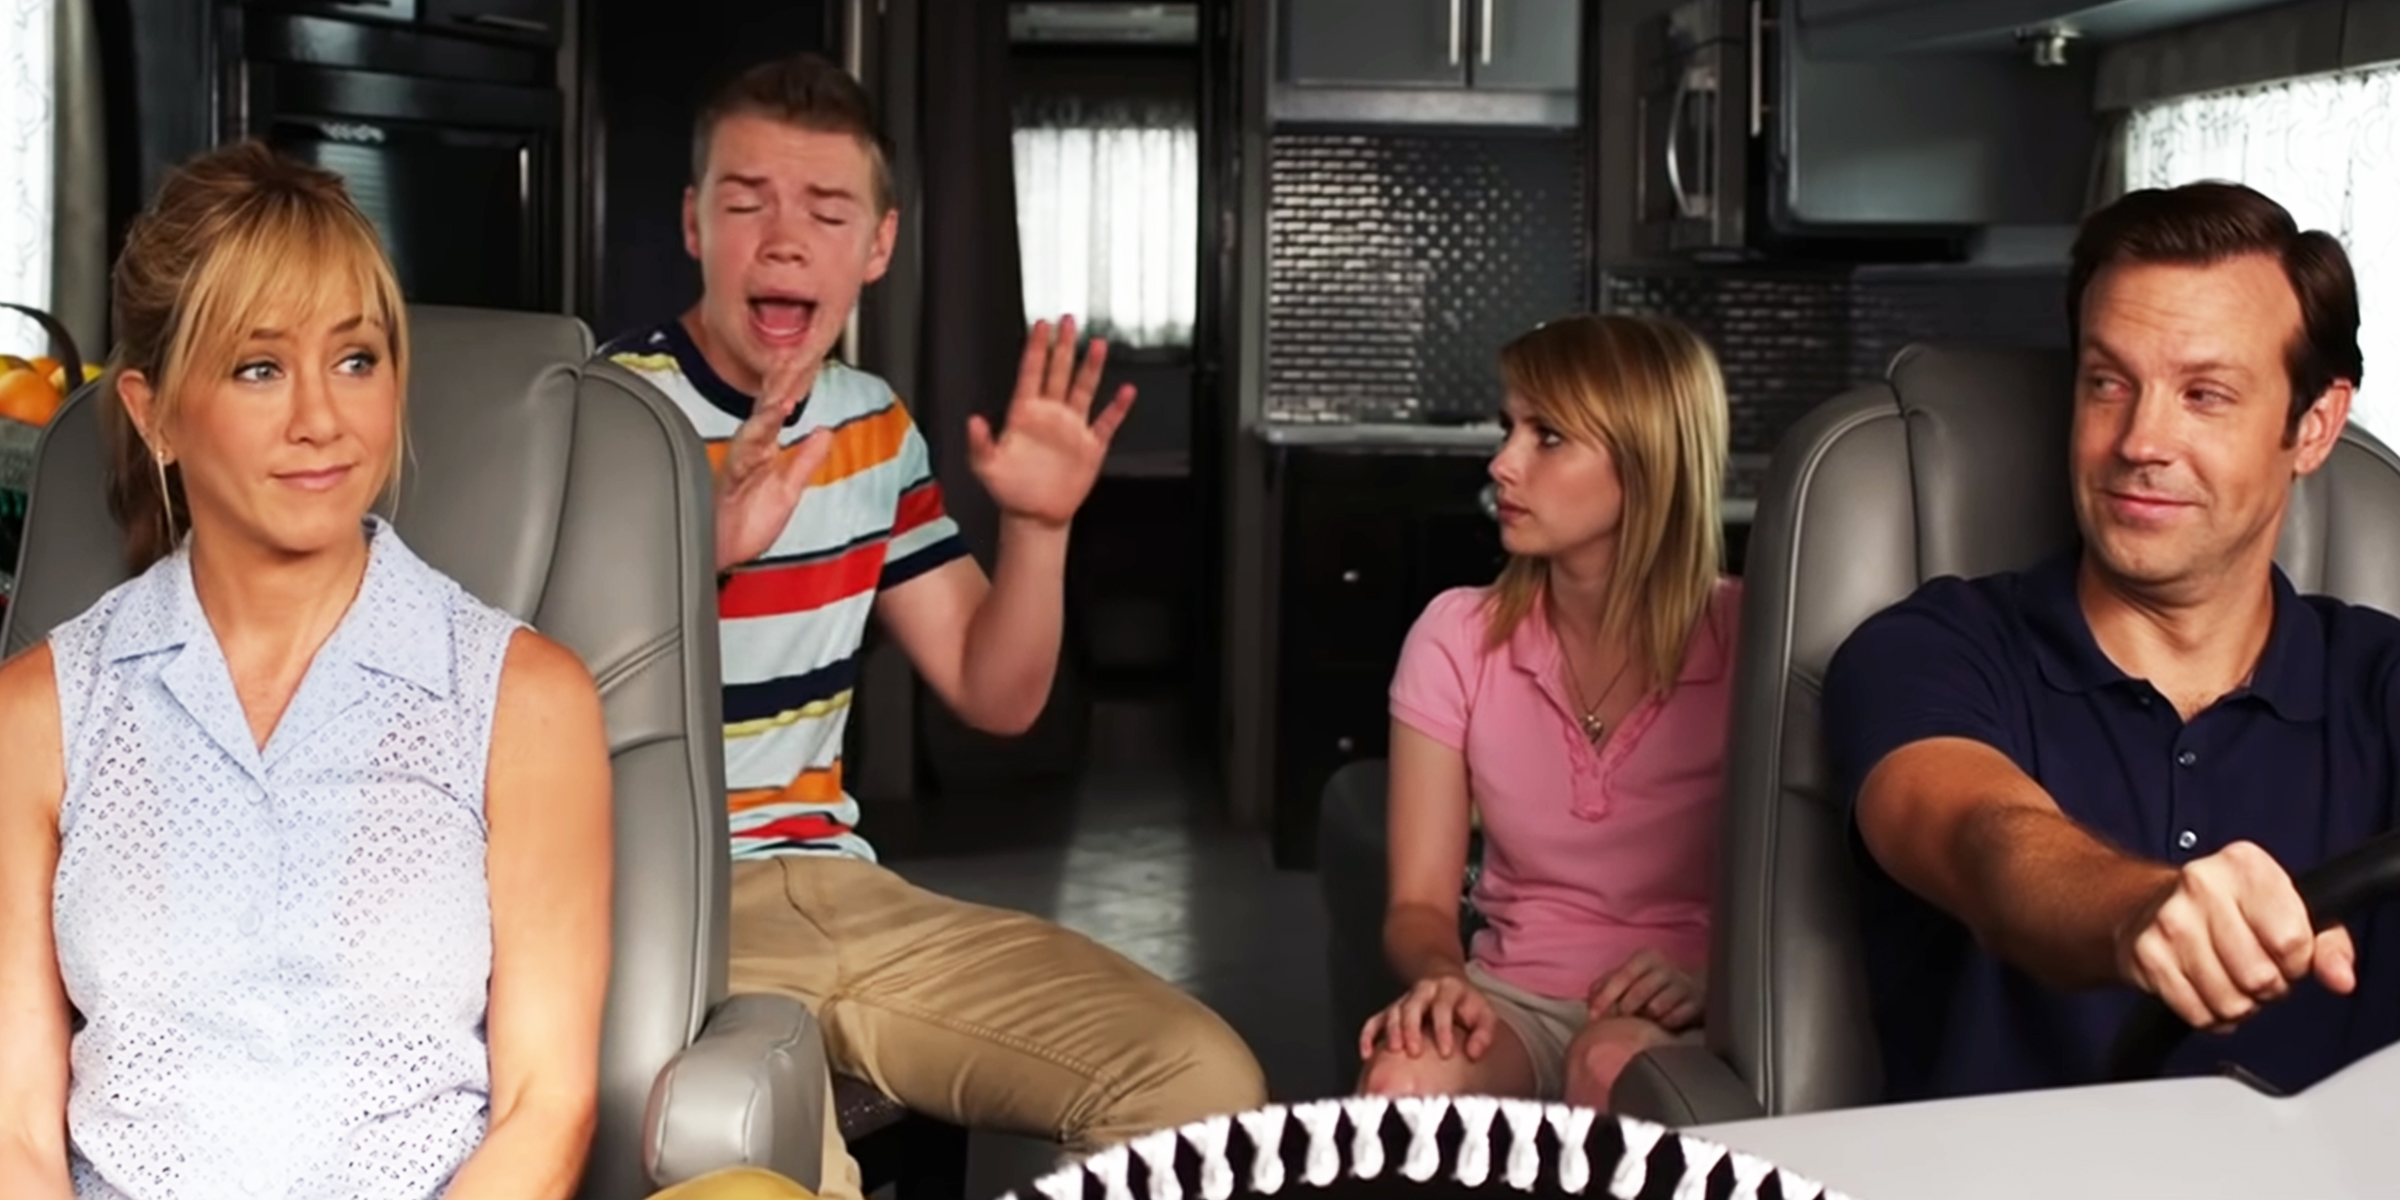 A movie still from "We’re the Millers," 2013. Front: Jennifer Aniston and Jason Sudeikis, back: Will Poulter and Emma Roberts | Source: Youtube.com/WarnerBros.Pictures